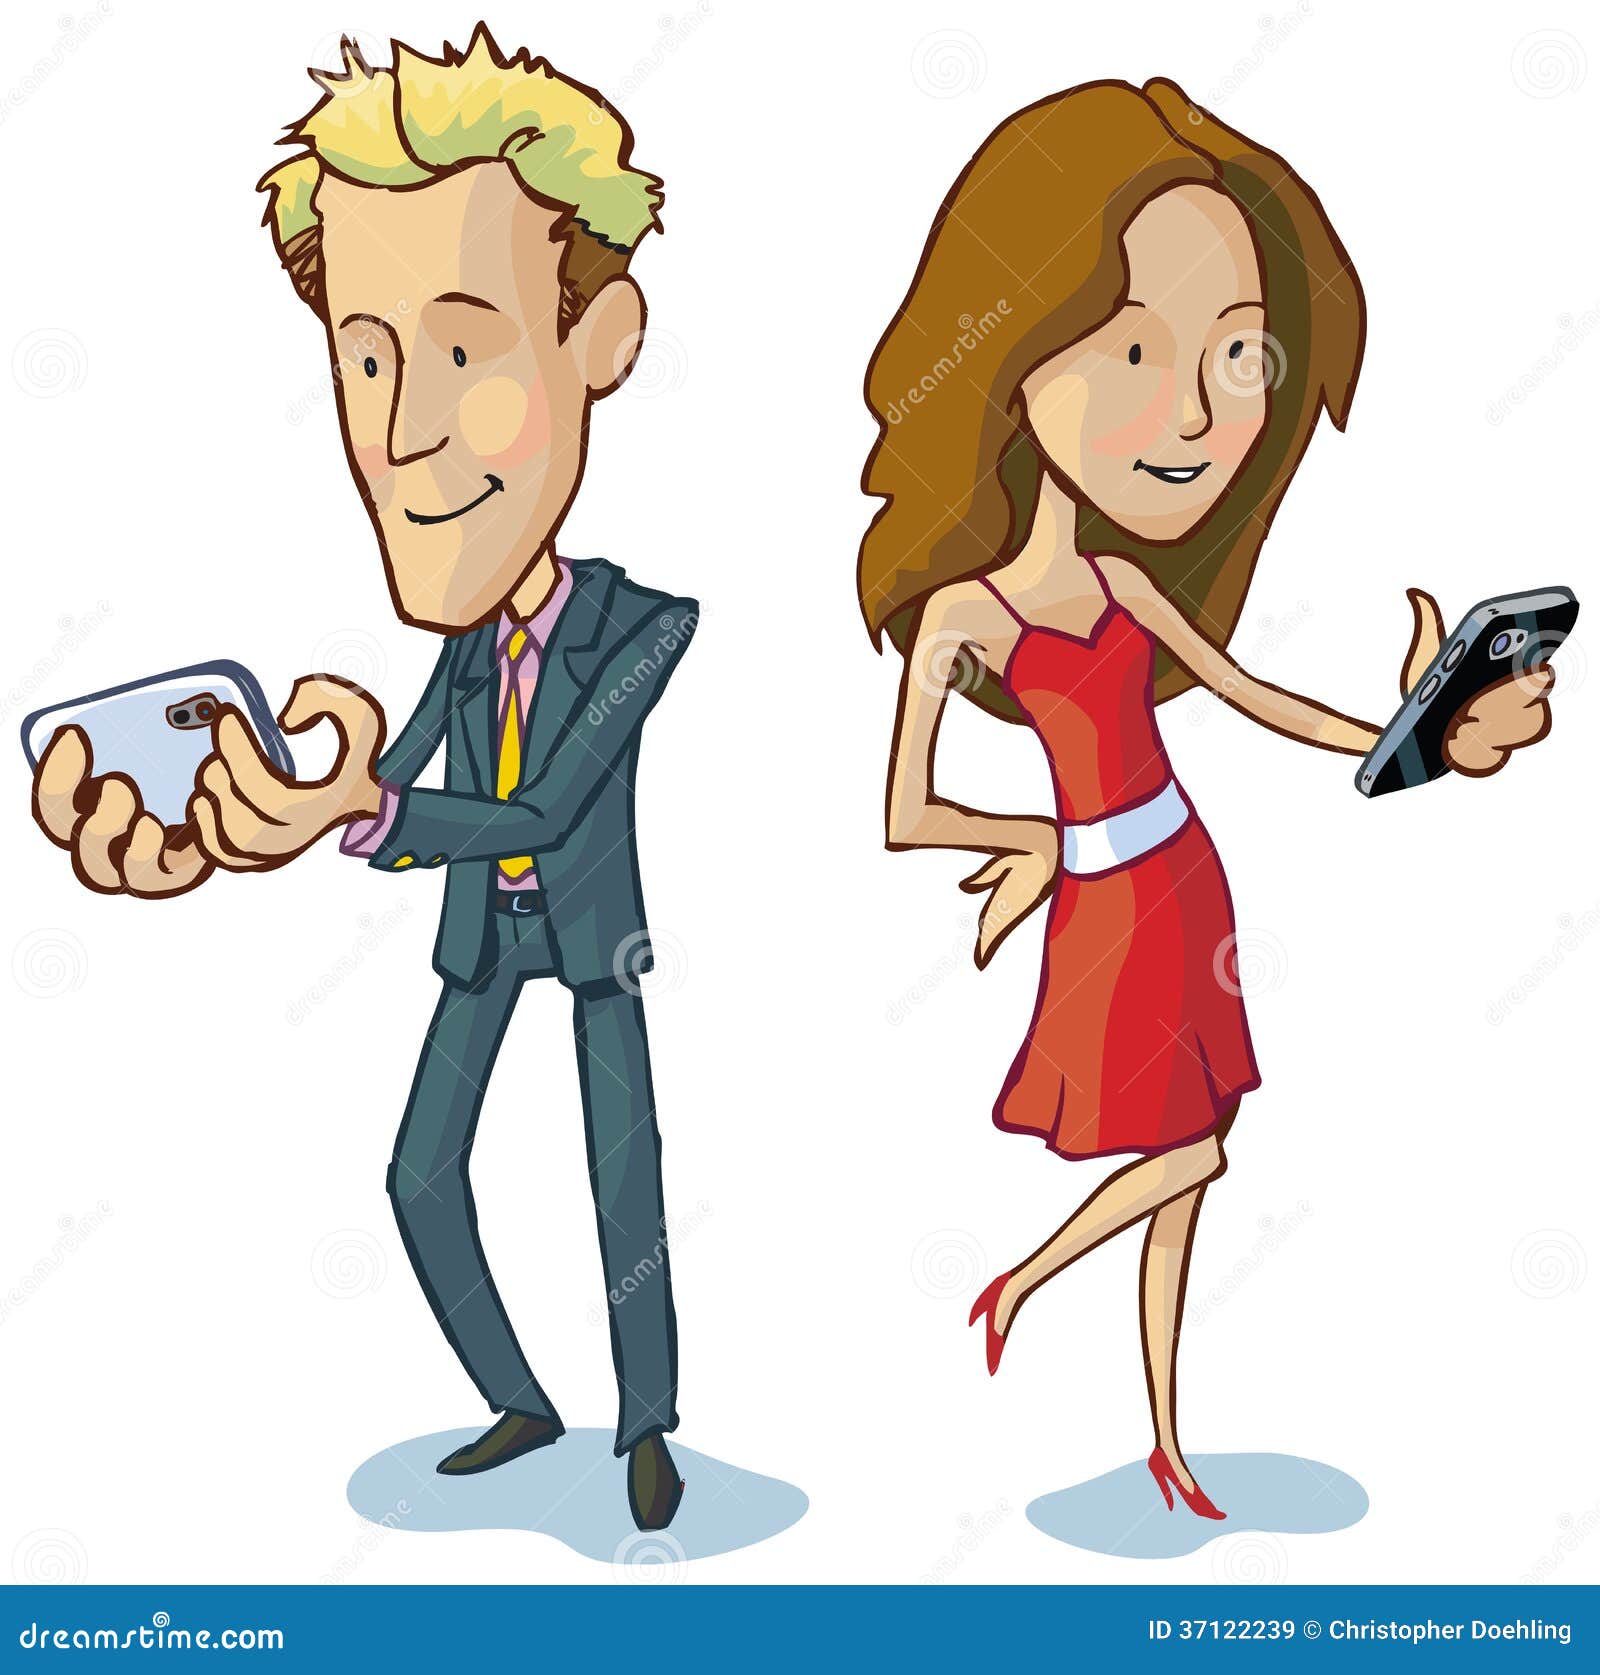 clipart of man and woman - photo #14